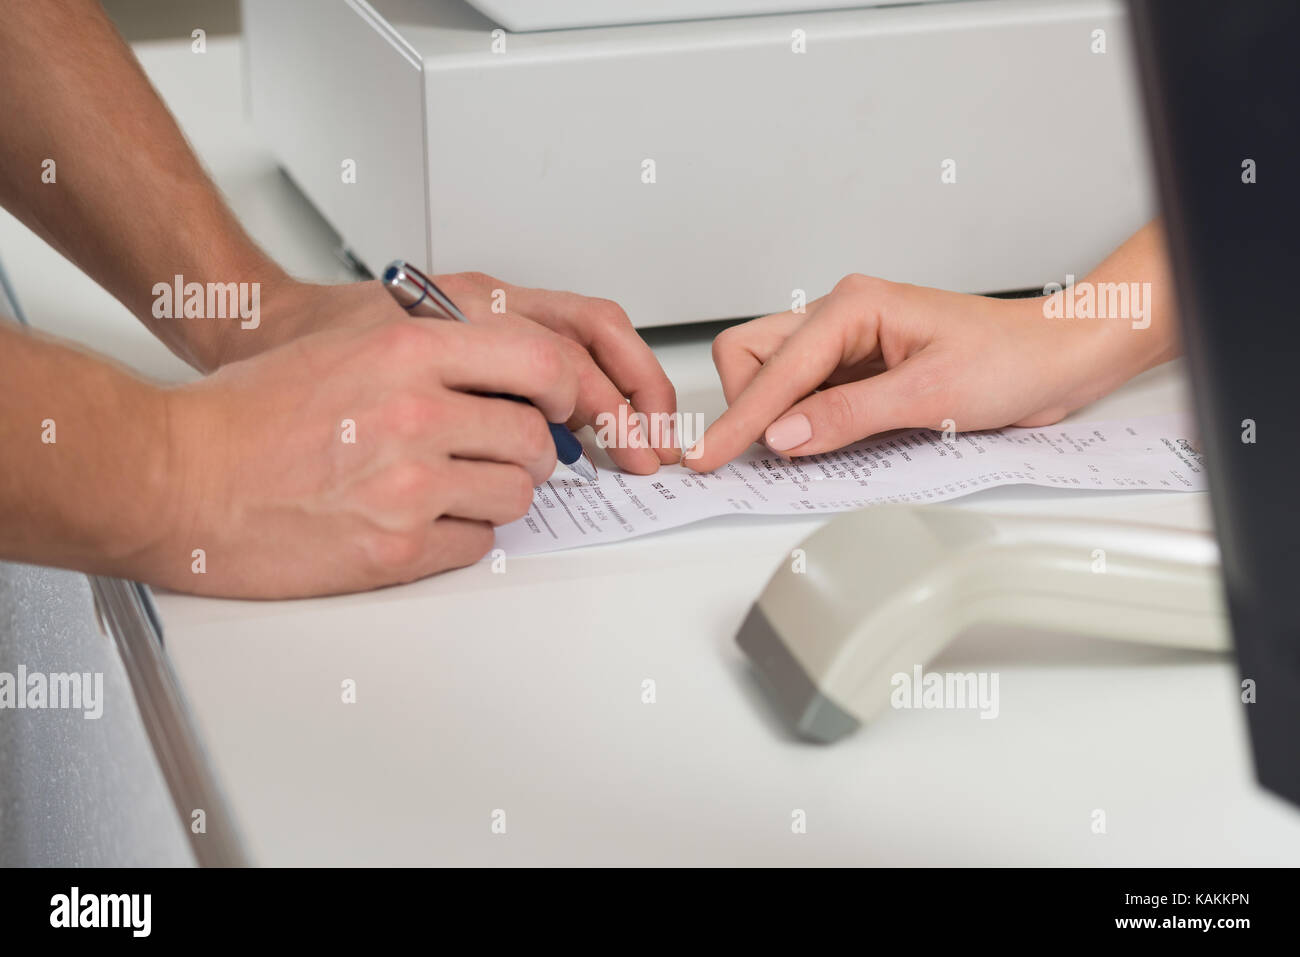 Cropped image of customer's hands signing on receipt at counter in store Stock Photo